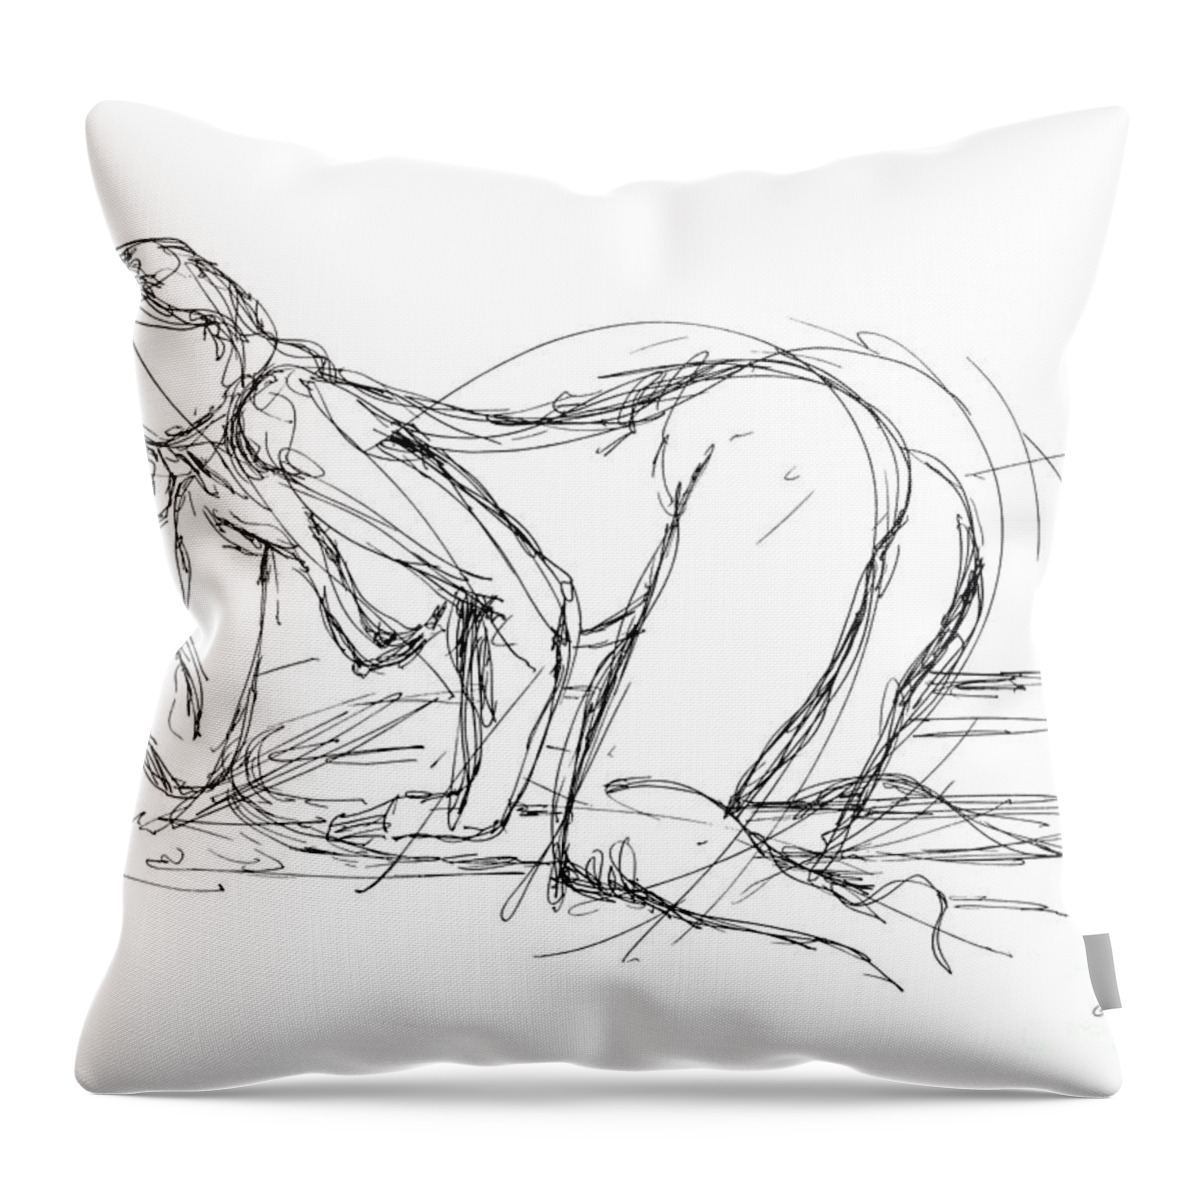 Female Erotic Drawings Throw Pillow featuring the drawing Female Erotic Sketches 2 by Gordon Punt